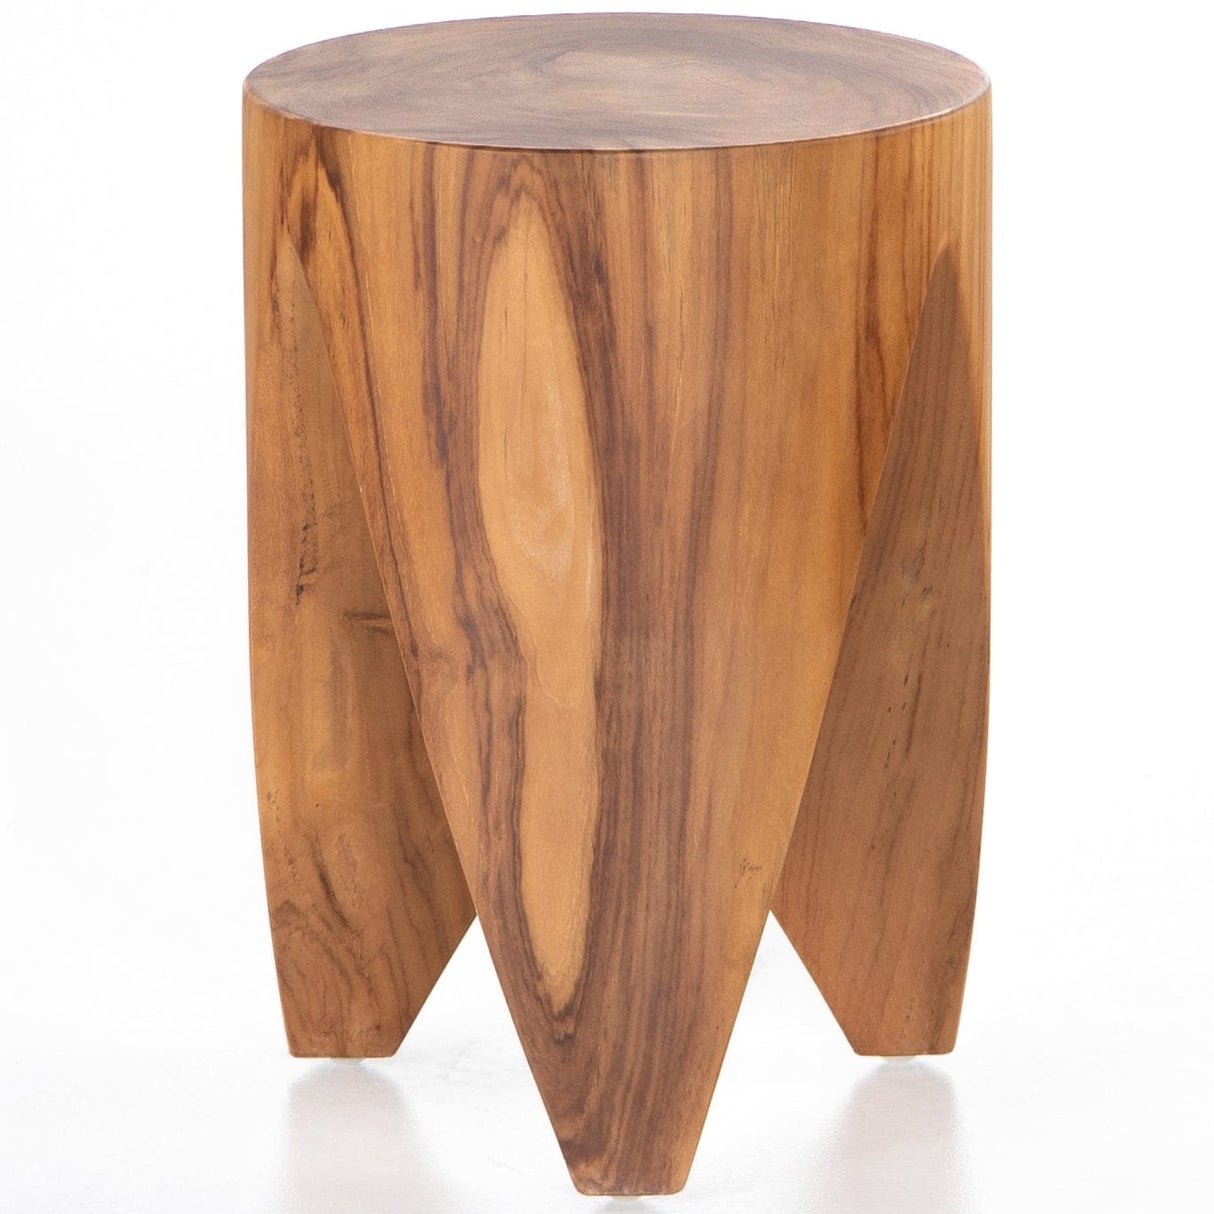 Four Hands Petros Outdoor End Table Furniture